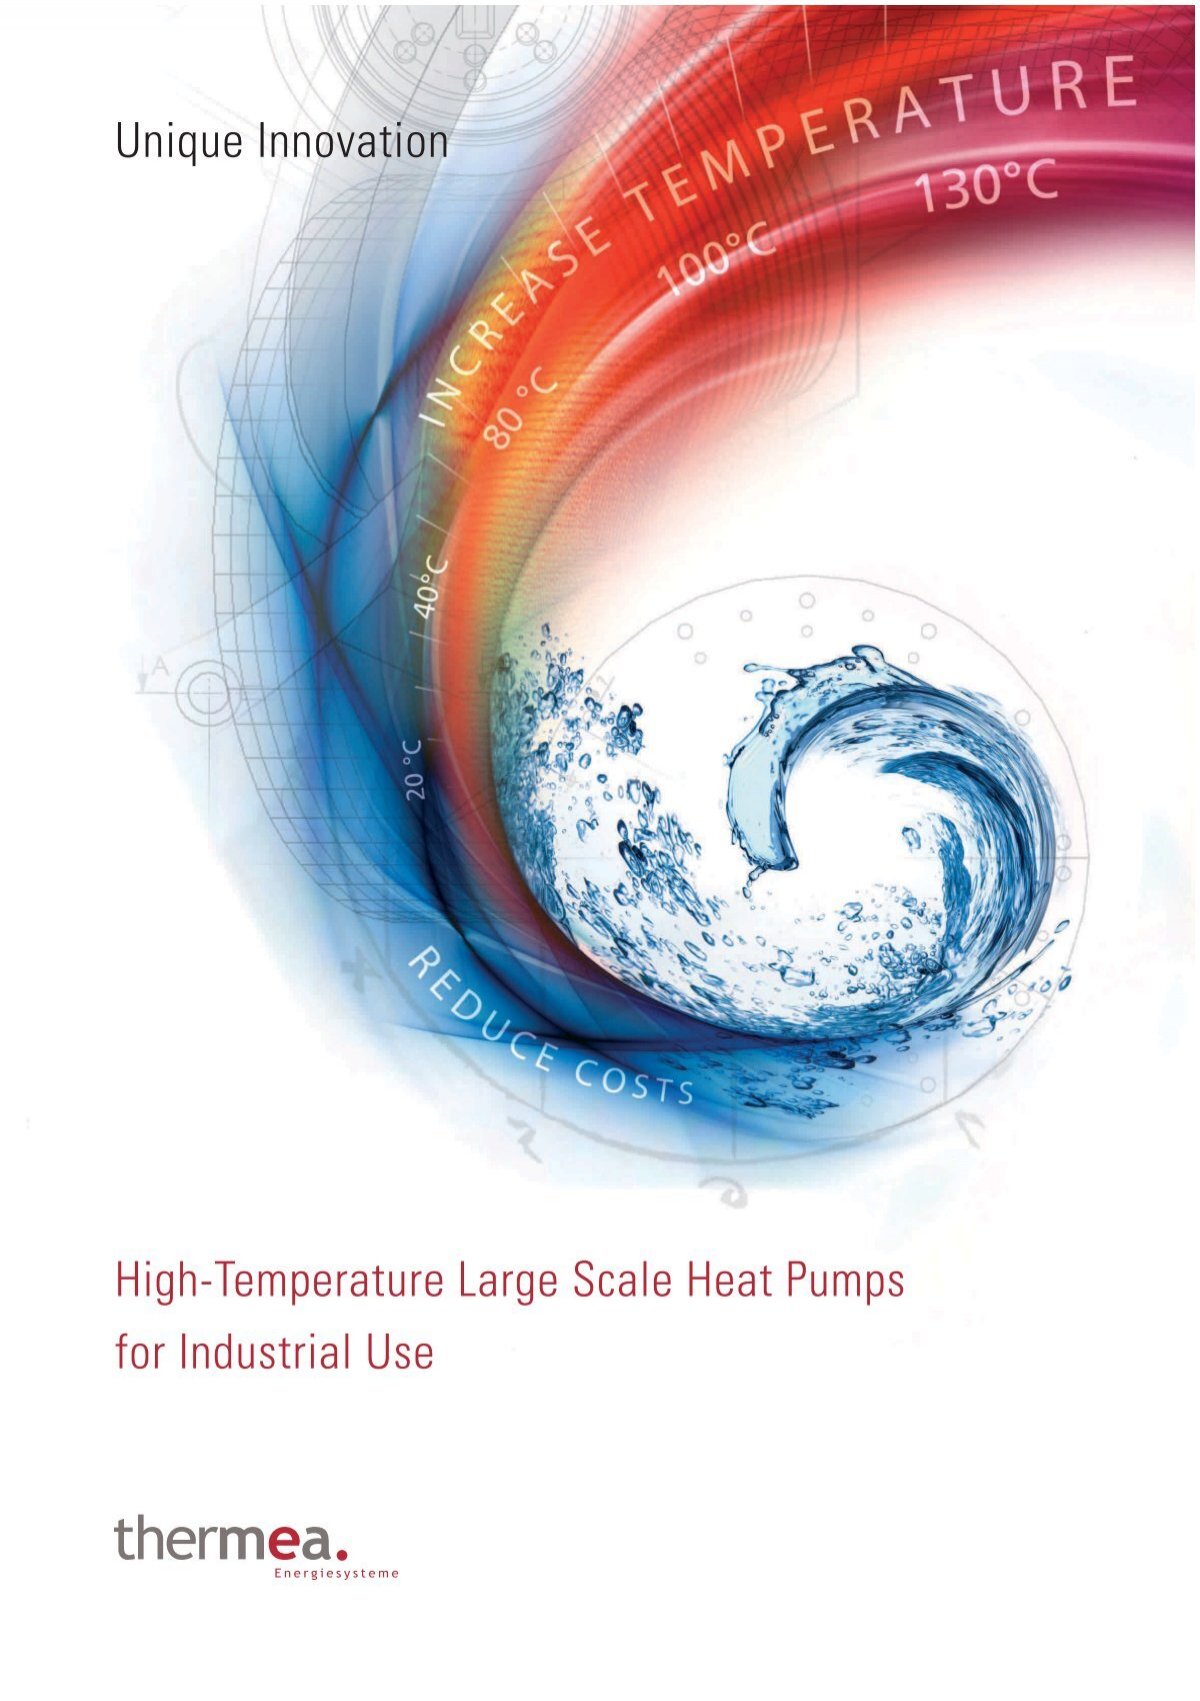 High-Temperature Large Scale Heat Pumps for Industrial Use